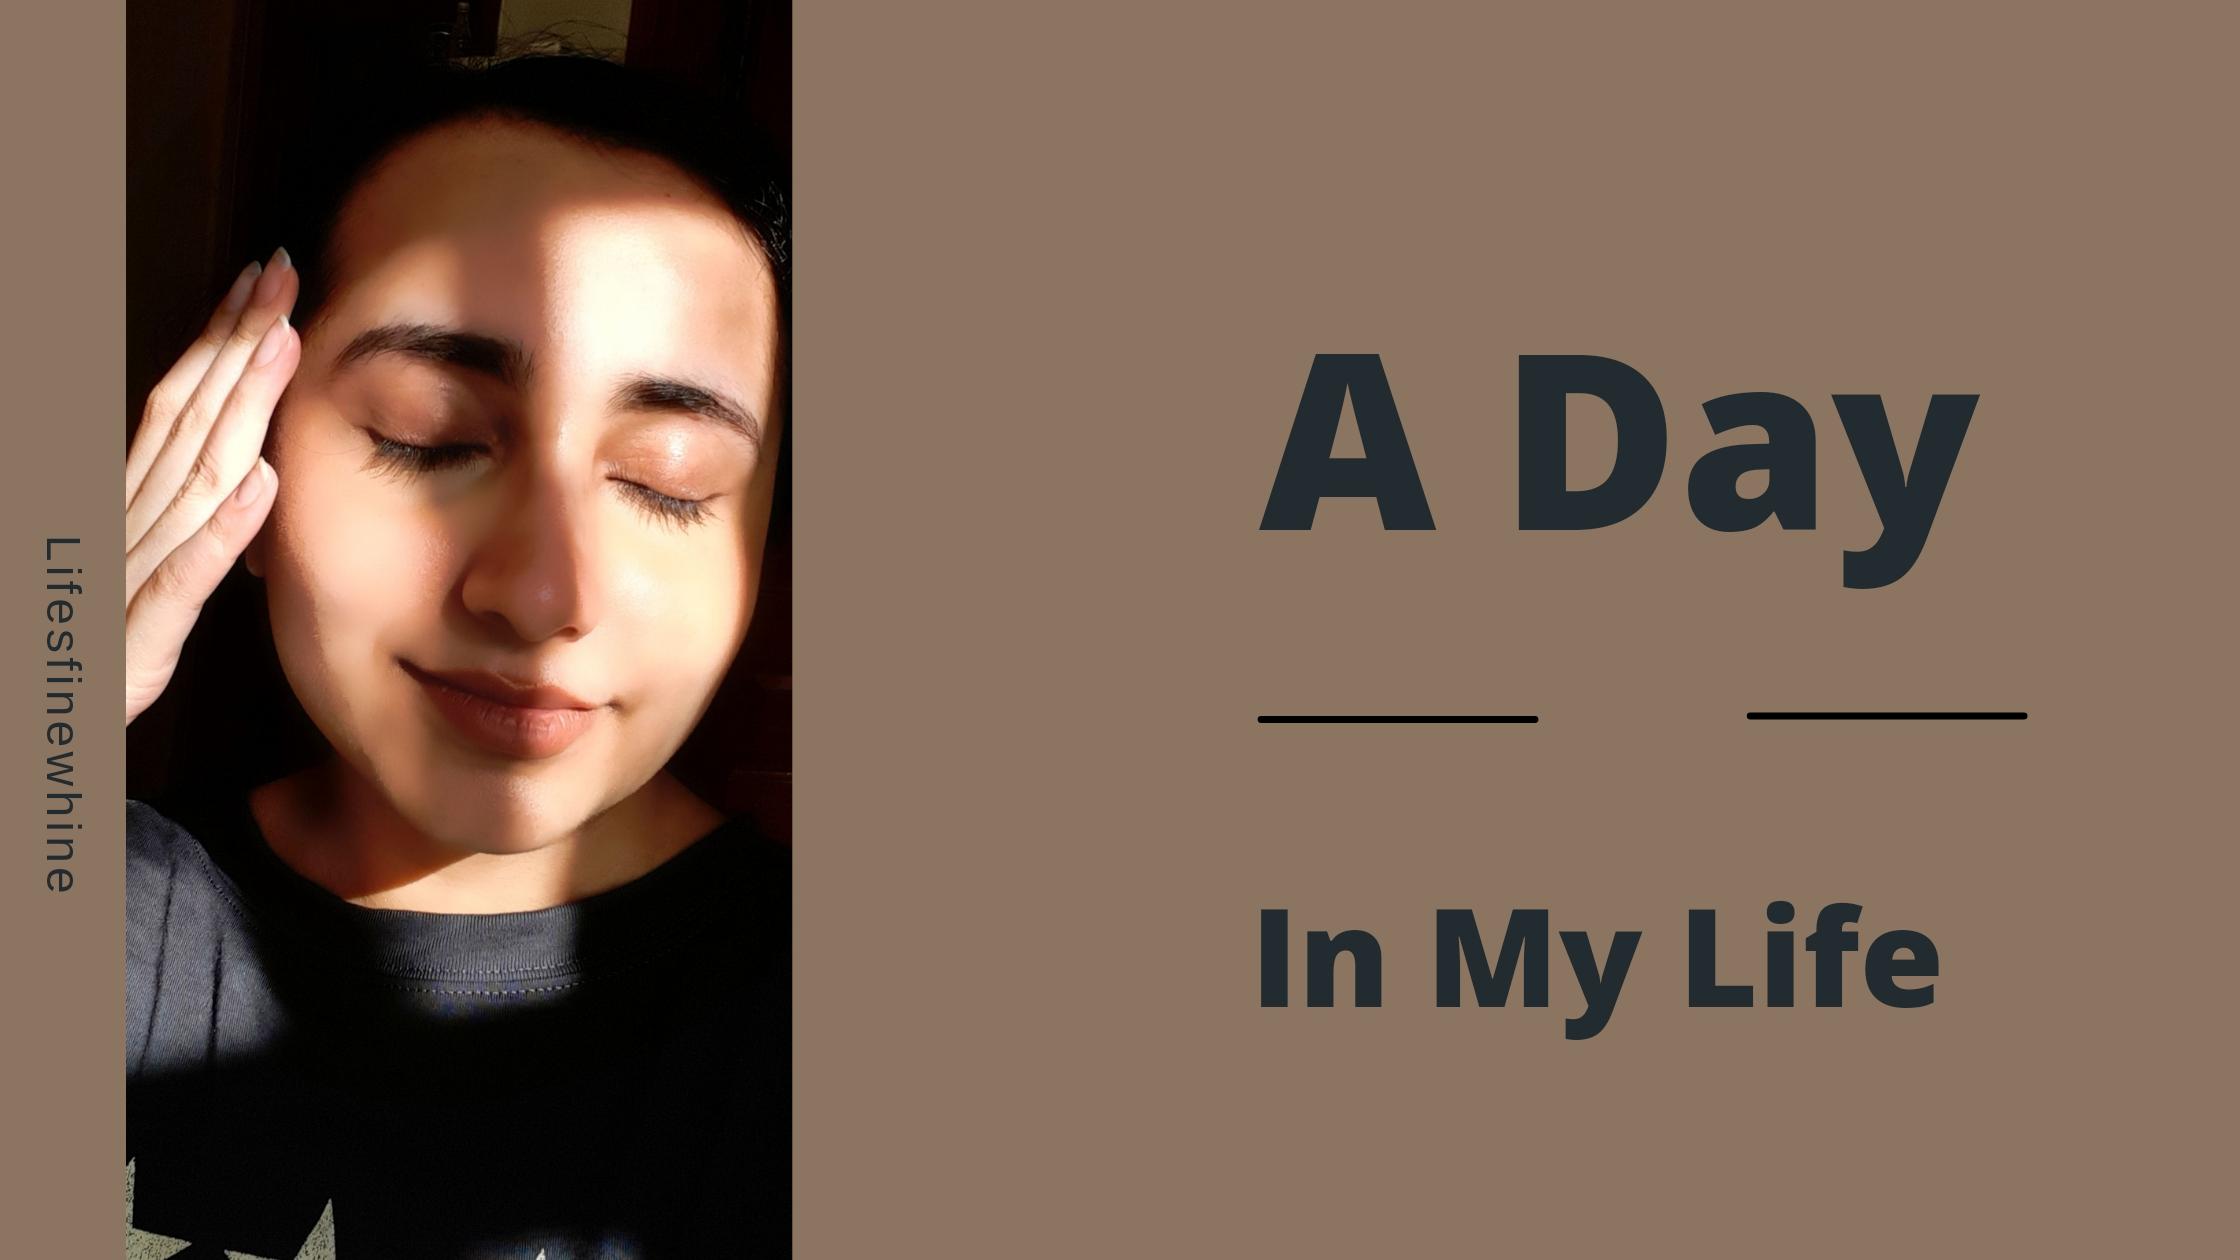 A Day In My Life (Work Edition)